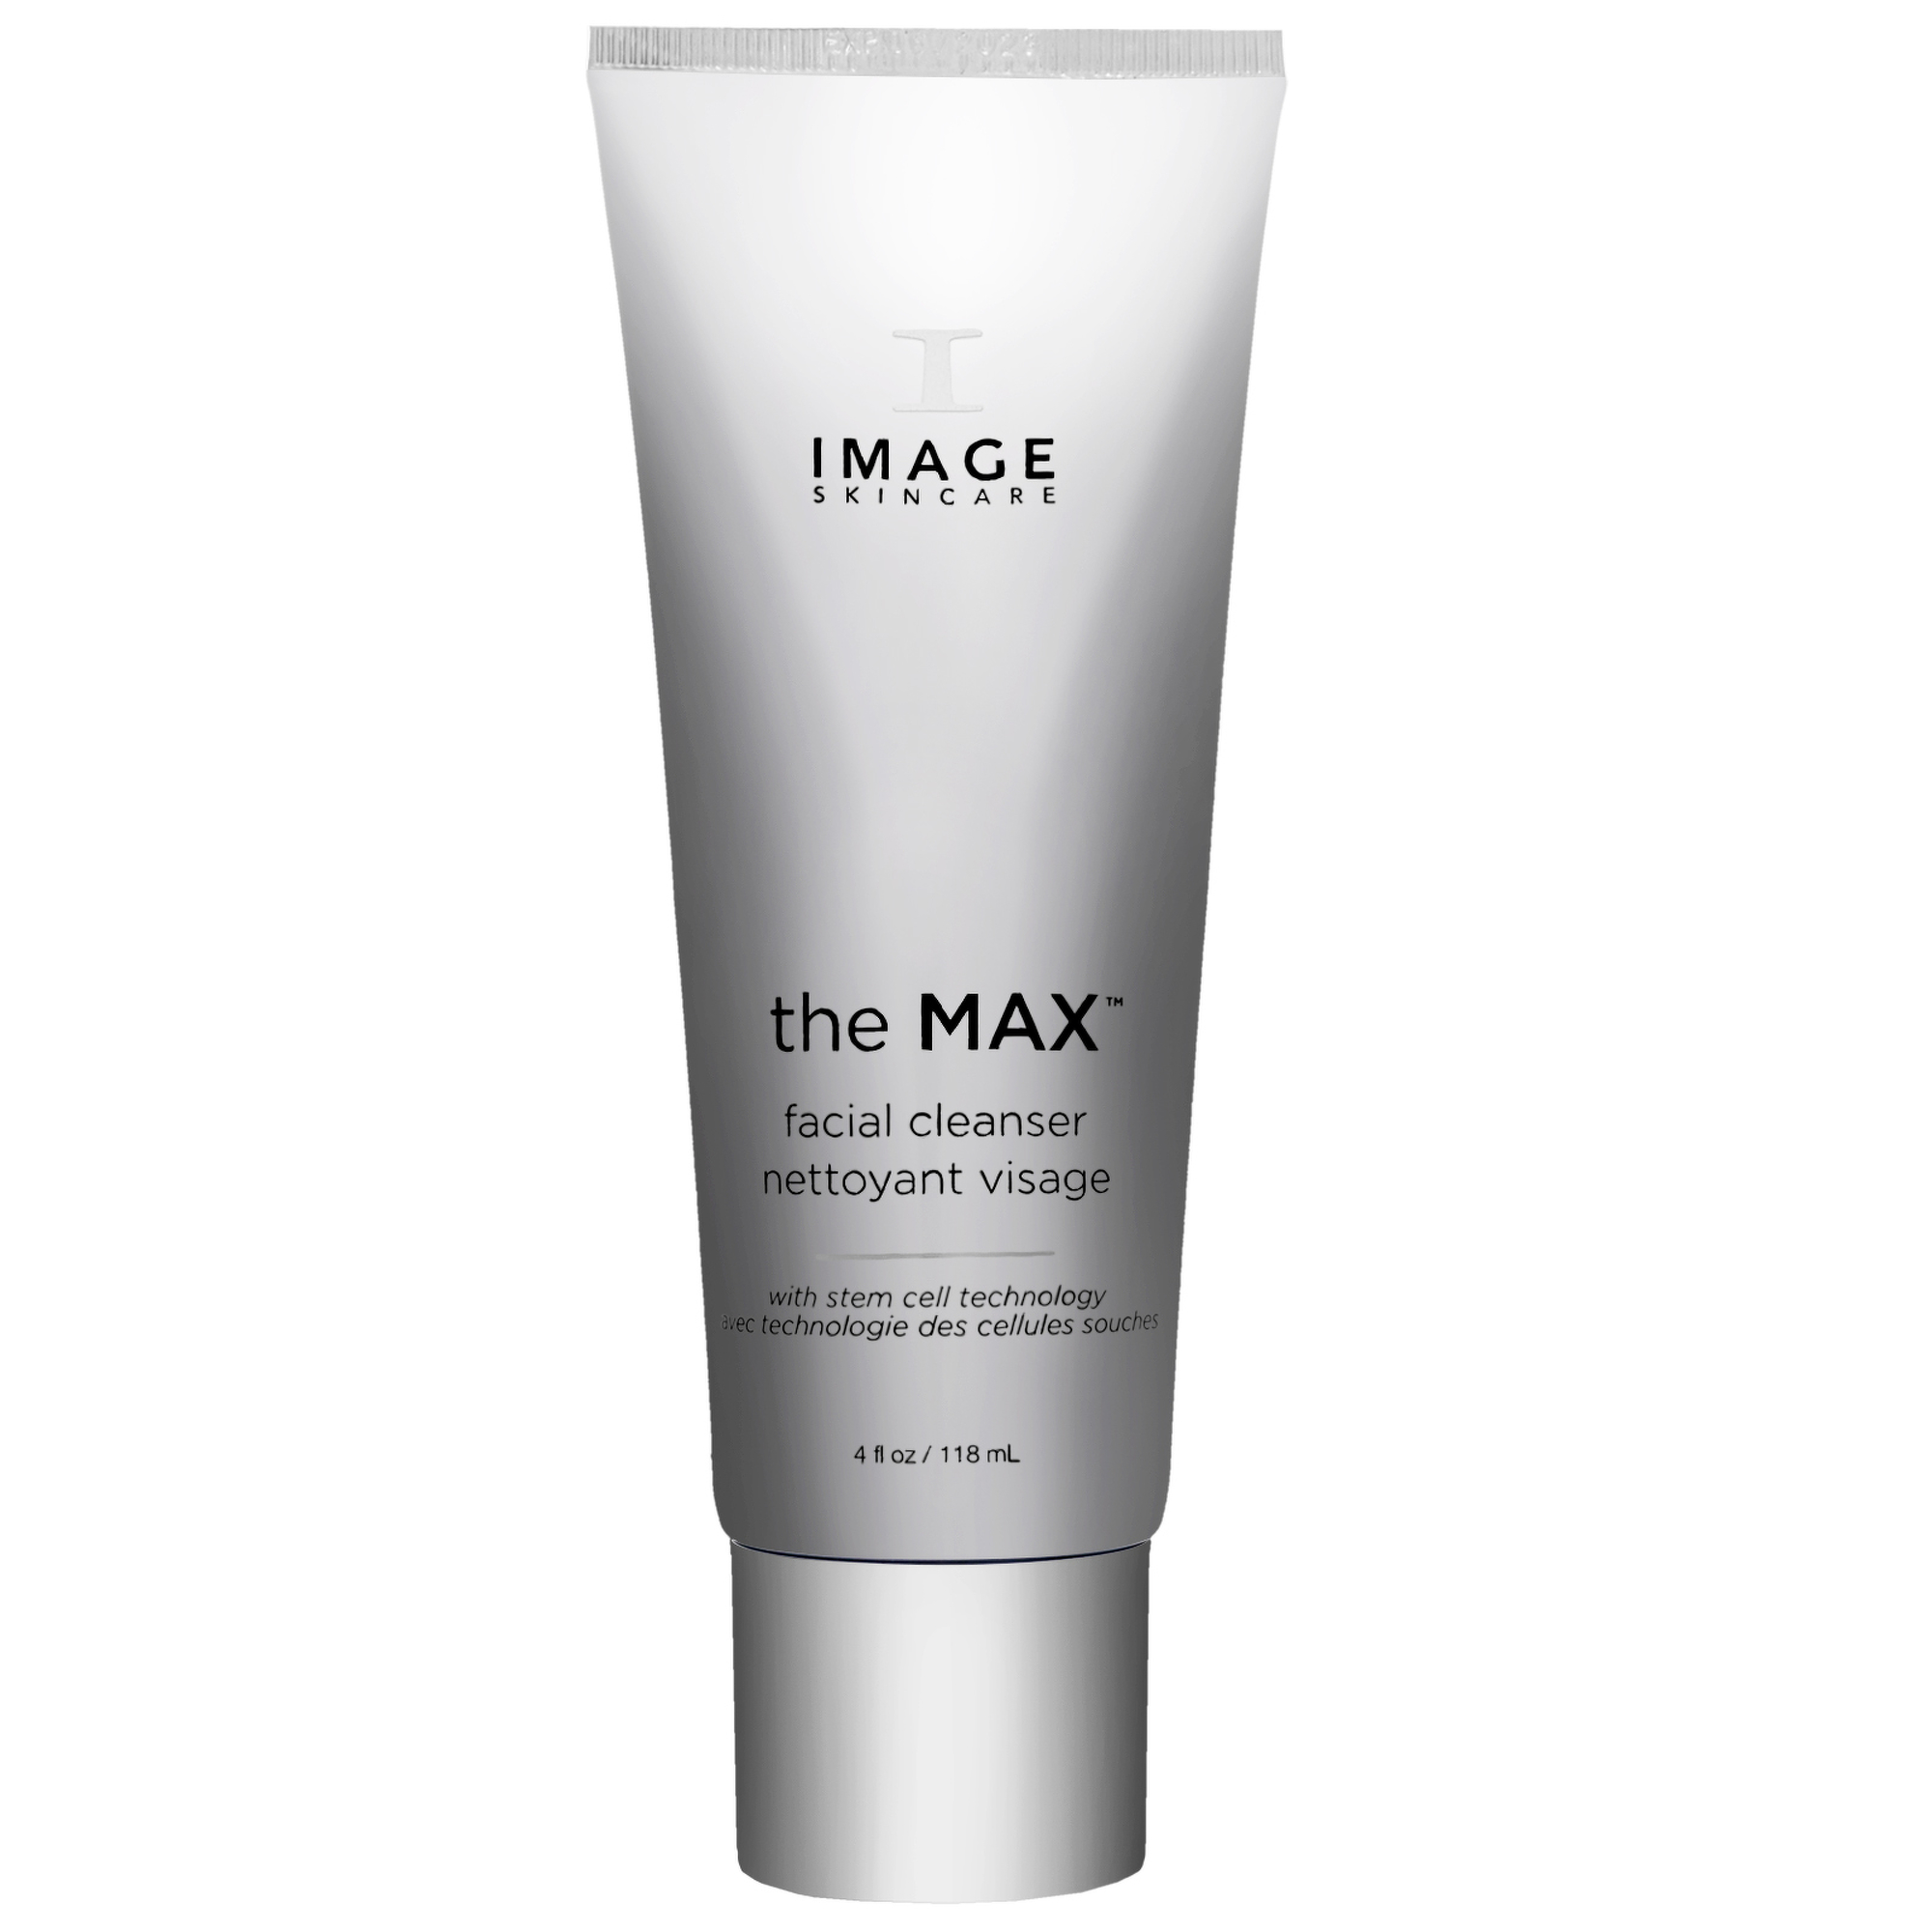 Photos - Facial / Body Cleansing Product IMAGE Skincare The Max Stem Cell Facial Cleanser 118ml / 4 fl.oz.